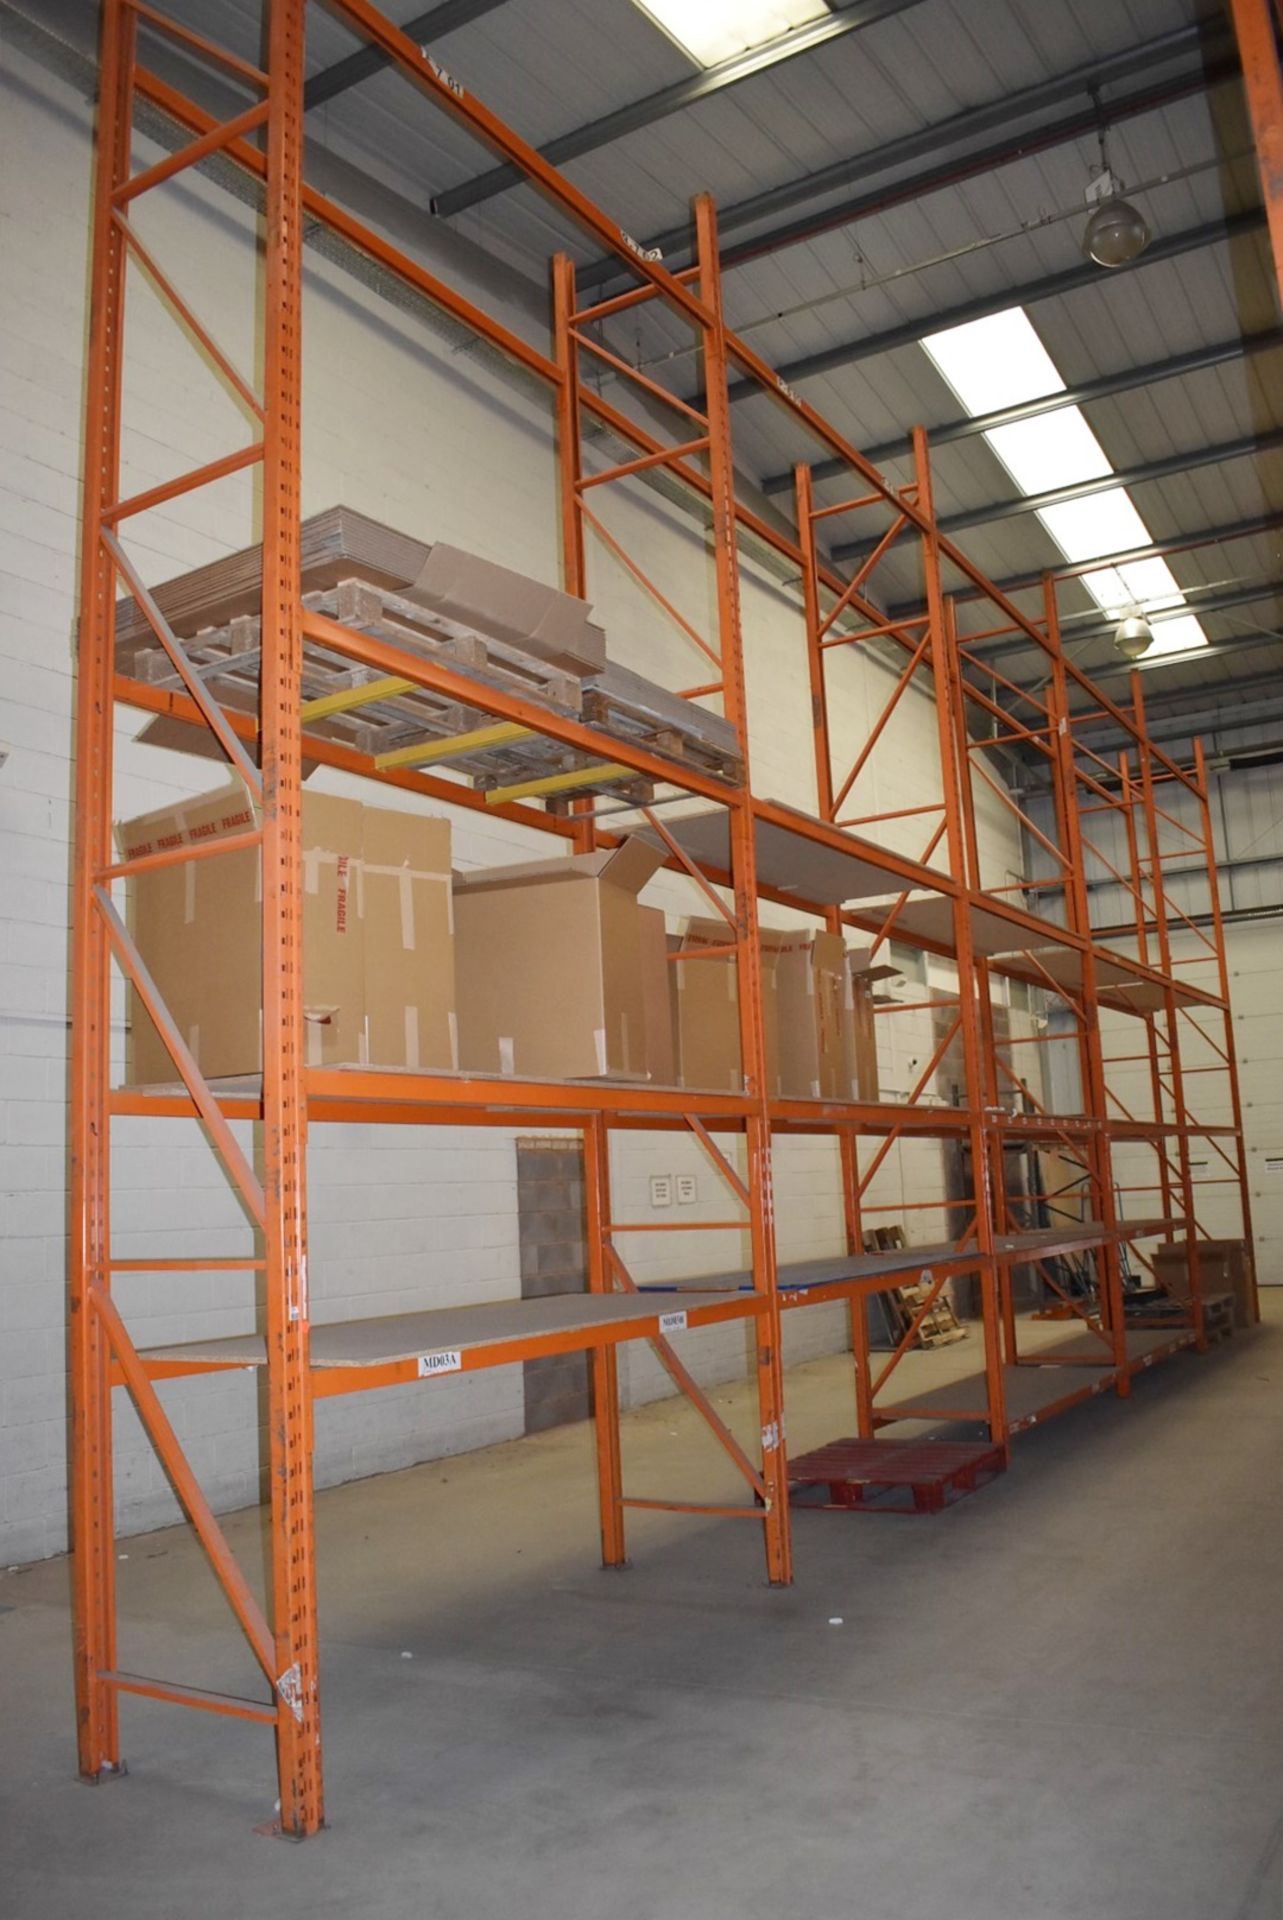 5 x Bays of RediRack Warehouse Pallet Racking - Lot Includes 6 x Uprights and 38 x Crossbeams - - Image 2 of 4